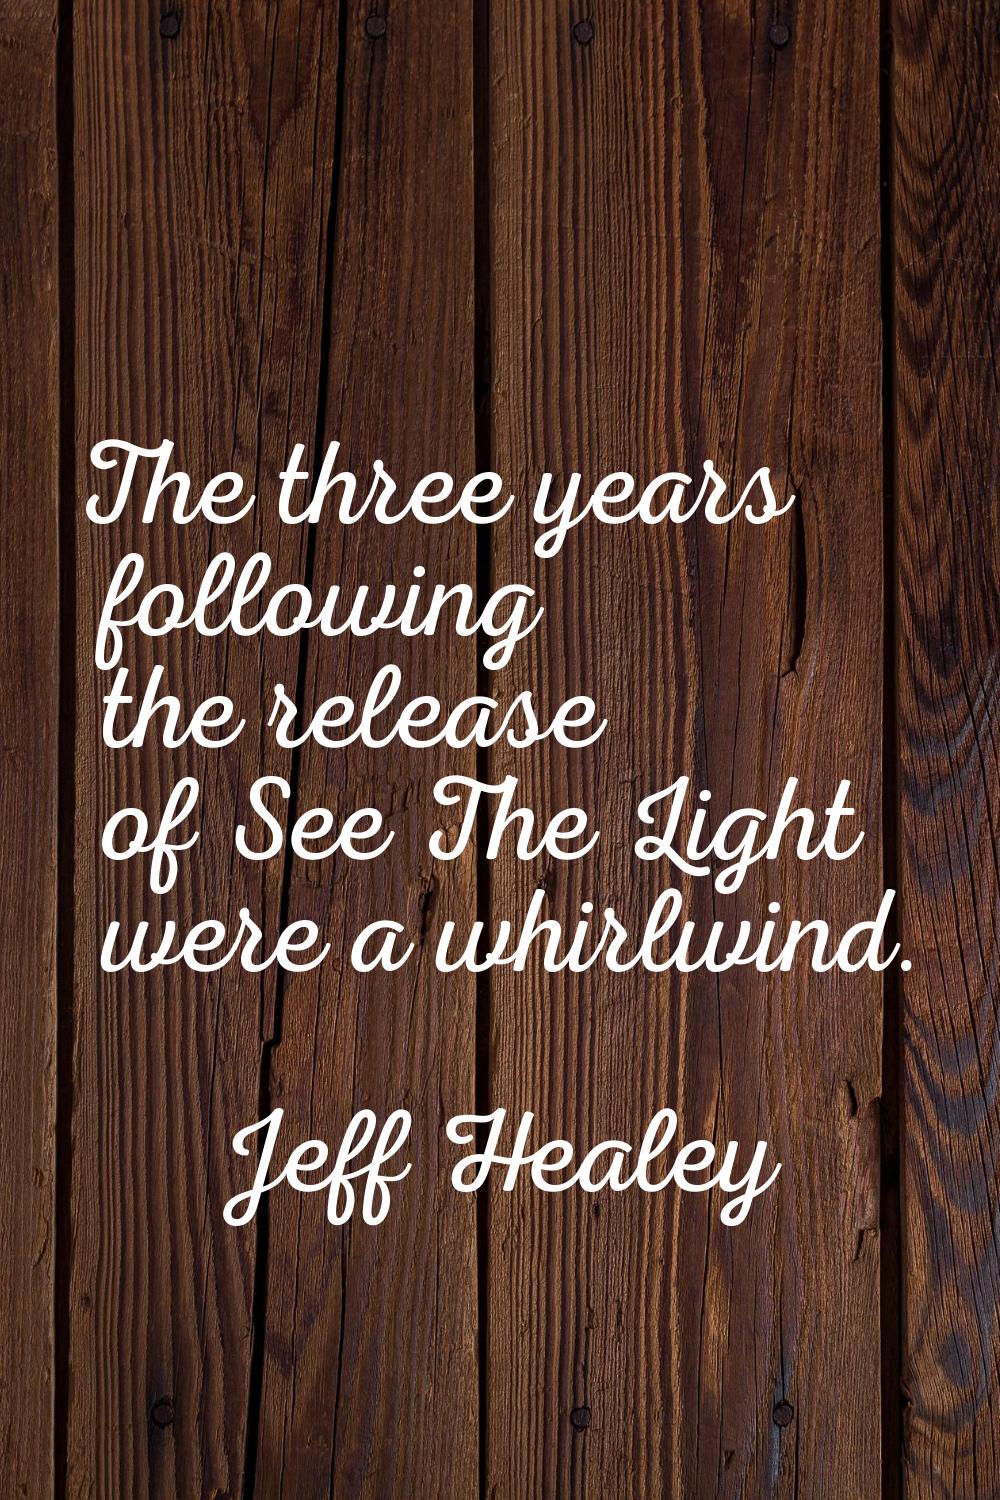 The three years following the release of See The Light were a whirlwind.